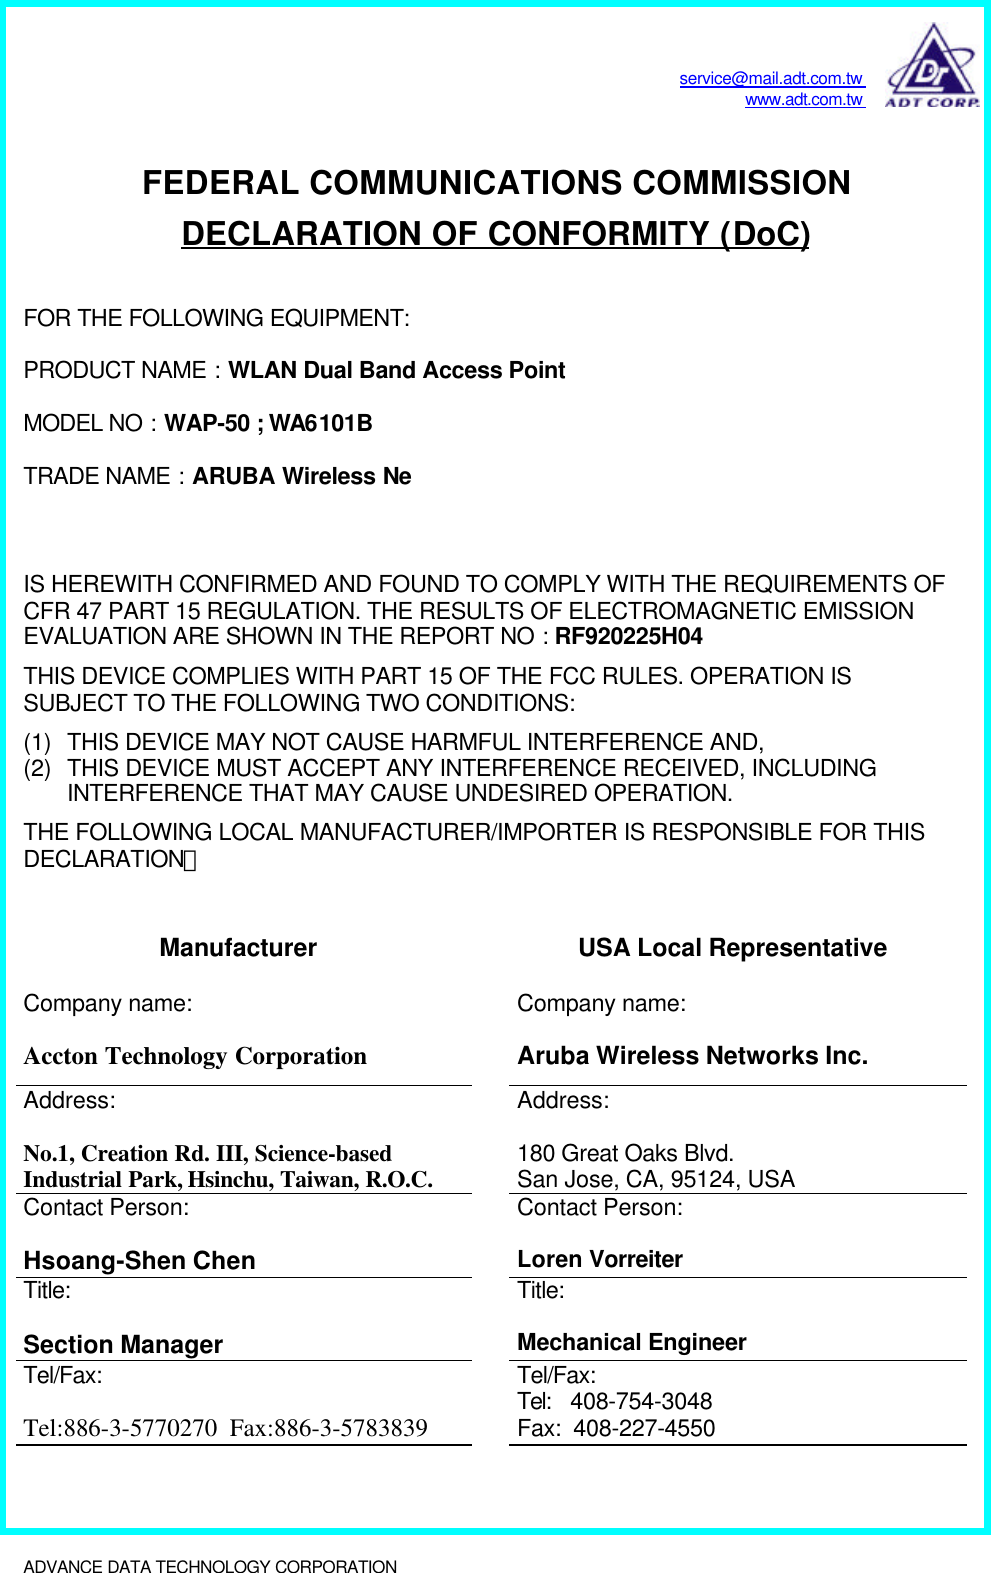 service@mail.adt.com.twwww.adt.com.twADVANCE DATA TECHNOLOGY CORPORATION              FEDERAL COMMUNICATIONS COMMISSIONDECLARATION OF CONFORMITY (DoC)FOR THE FOLLOWING EQUIPMENT:PRODUCT NAME : WLAN Dual Band Access PointMODEL NO : WAP-50 ; WA6101BTRADE NAME : ARUBA Wireless NeIS HEREWITH CONFIRMED AND FOUND TO COMPLY WITH THE REQUIREMENTS OFCFR 47 PART 15 REGULATION. THE RESULTS OF ELECTROMAGNETIC EMISSIONEVALUATION ARE SHOWN IN THE REPORT NO : RF920225H04THIS DEVICE COMPLIES WITH PART 15 OF THE FCC RULES. OPERATION ISSUBJECT TO THE FOLLOWING TWO CONDITIONS:(1) THIS DEVICE MAY NOT CAUSE HARMFUL INTERFERENCE AND,(2) THIS DEVICE MUST ACCEPT ANY INTERFERENCE RECEIVED, INCLUDINGINTERFERENCE THAT MAY CAUSE UNDESIRED OPERATION.THE FOLLOWING LOCAL MANUFACTURER/IMPORTER IS RESPONSIBLE FOR THISDECLARATION：Manufacturer USA Local RepresentativeCompany name:Accton Technology CorporationCompany name:Aruba Wireless Networks Inc.Address:No.1, Creation Rd. III, Science-basedIndustrial Park, Hsinchu, Taiwan, R.O.C.Address:180 Great Oaks Blvd.San Jose, CA, 95124, USAContact Person:Hsoang-Shen ChenContact Person:Loren VorreiterTitle:Section ManagerTitle:Mechanical EngineerTel/Fax:Tel:886-3-5770270  Fax:886-3-5783839Tel/Fax:Tel:   408-754-3048Fax:  408-227-4550